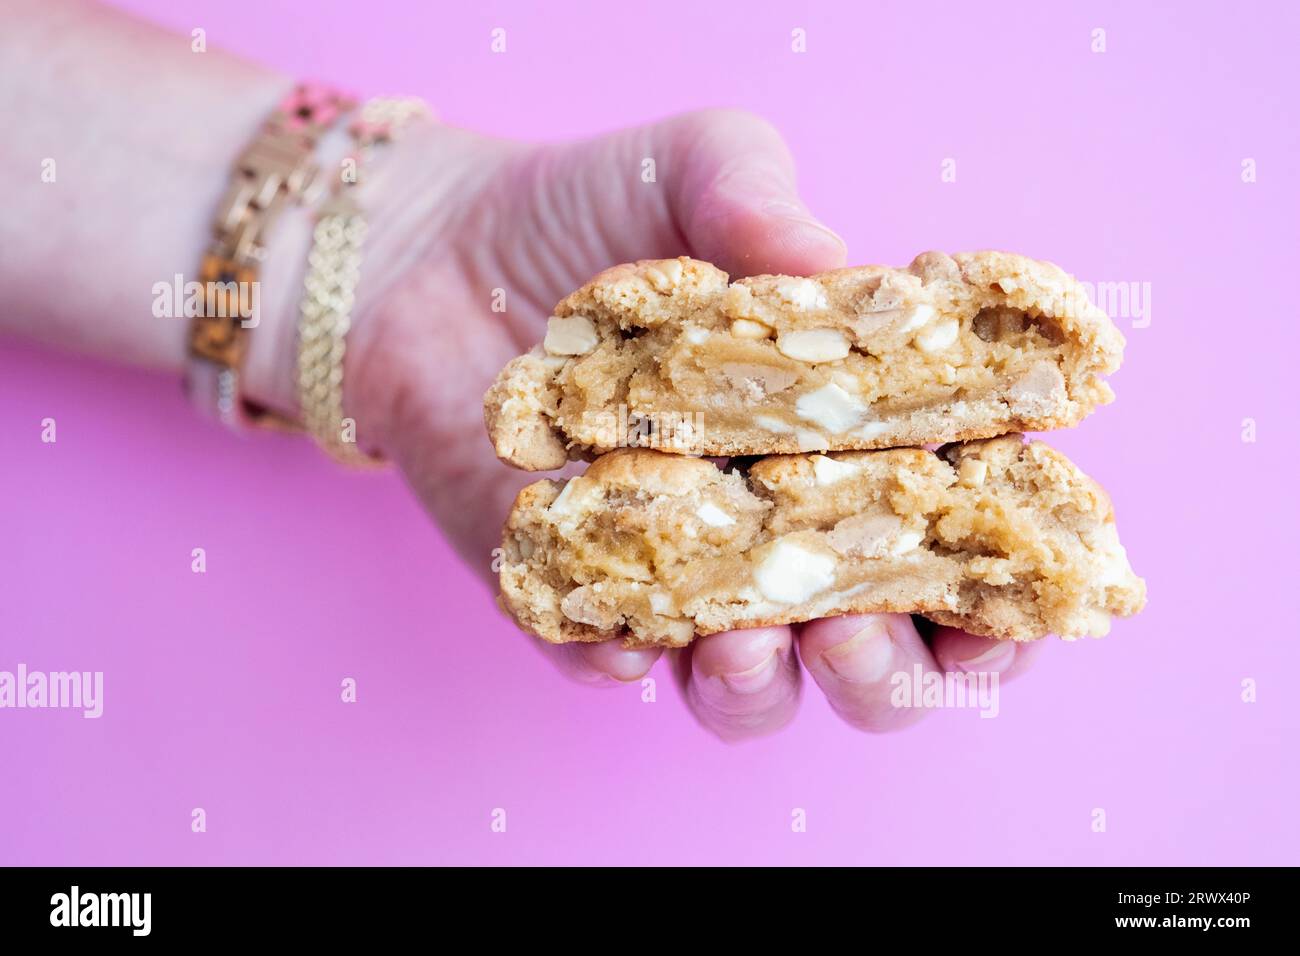 A woman holding a broken in half homemade New York style peanut butter Chip Cookie. Its a  large cookie with a  crisp outer crust and soft centre. Stock Photo